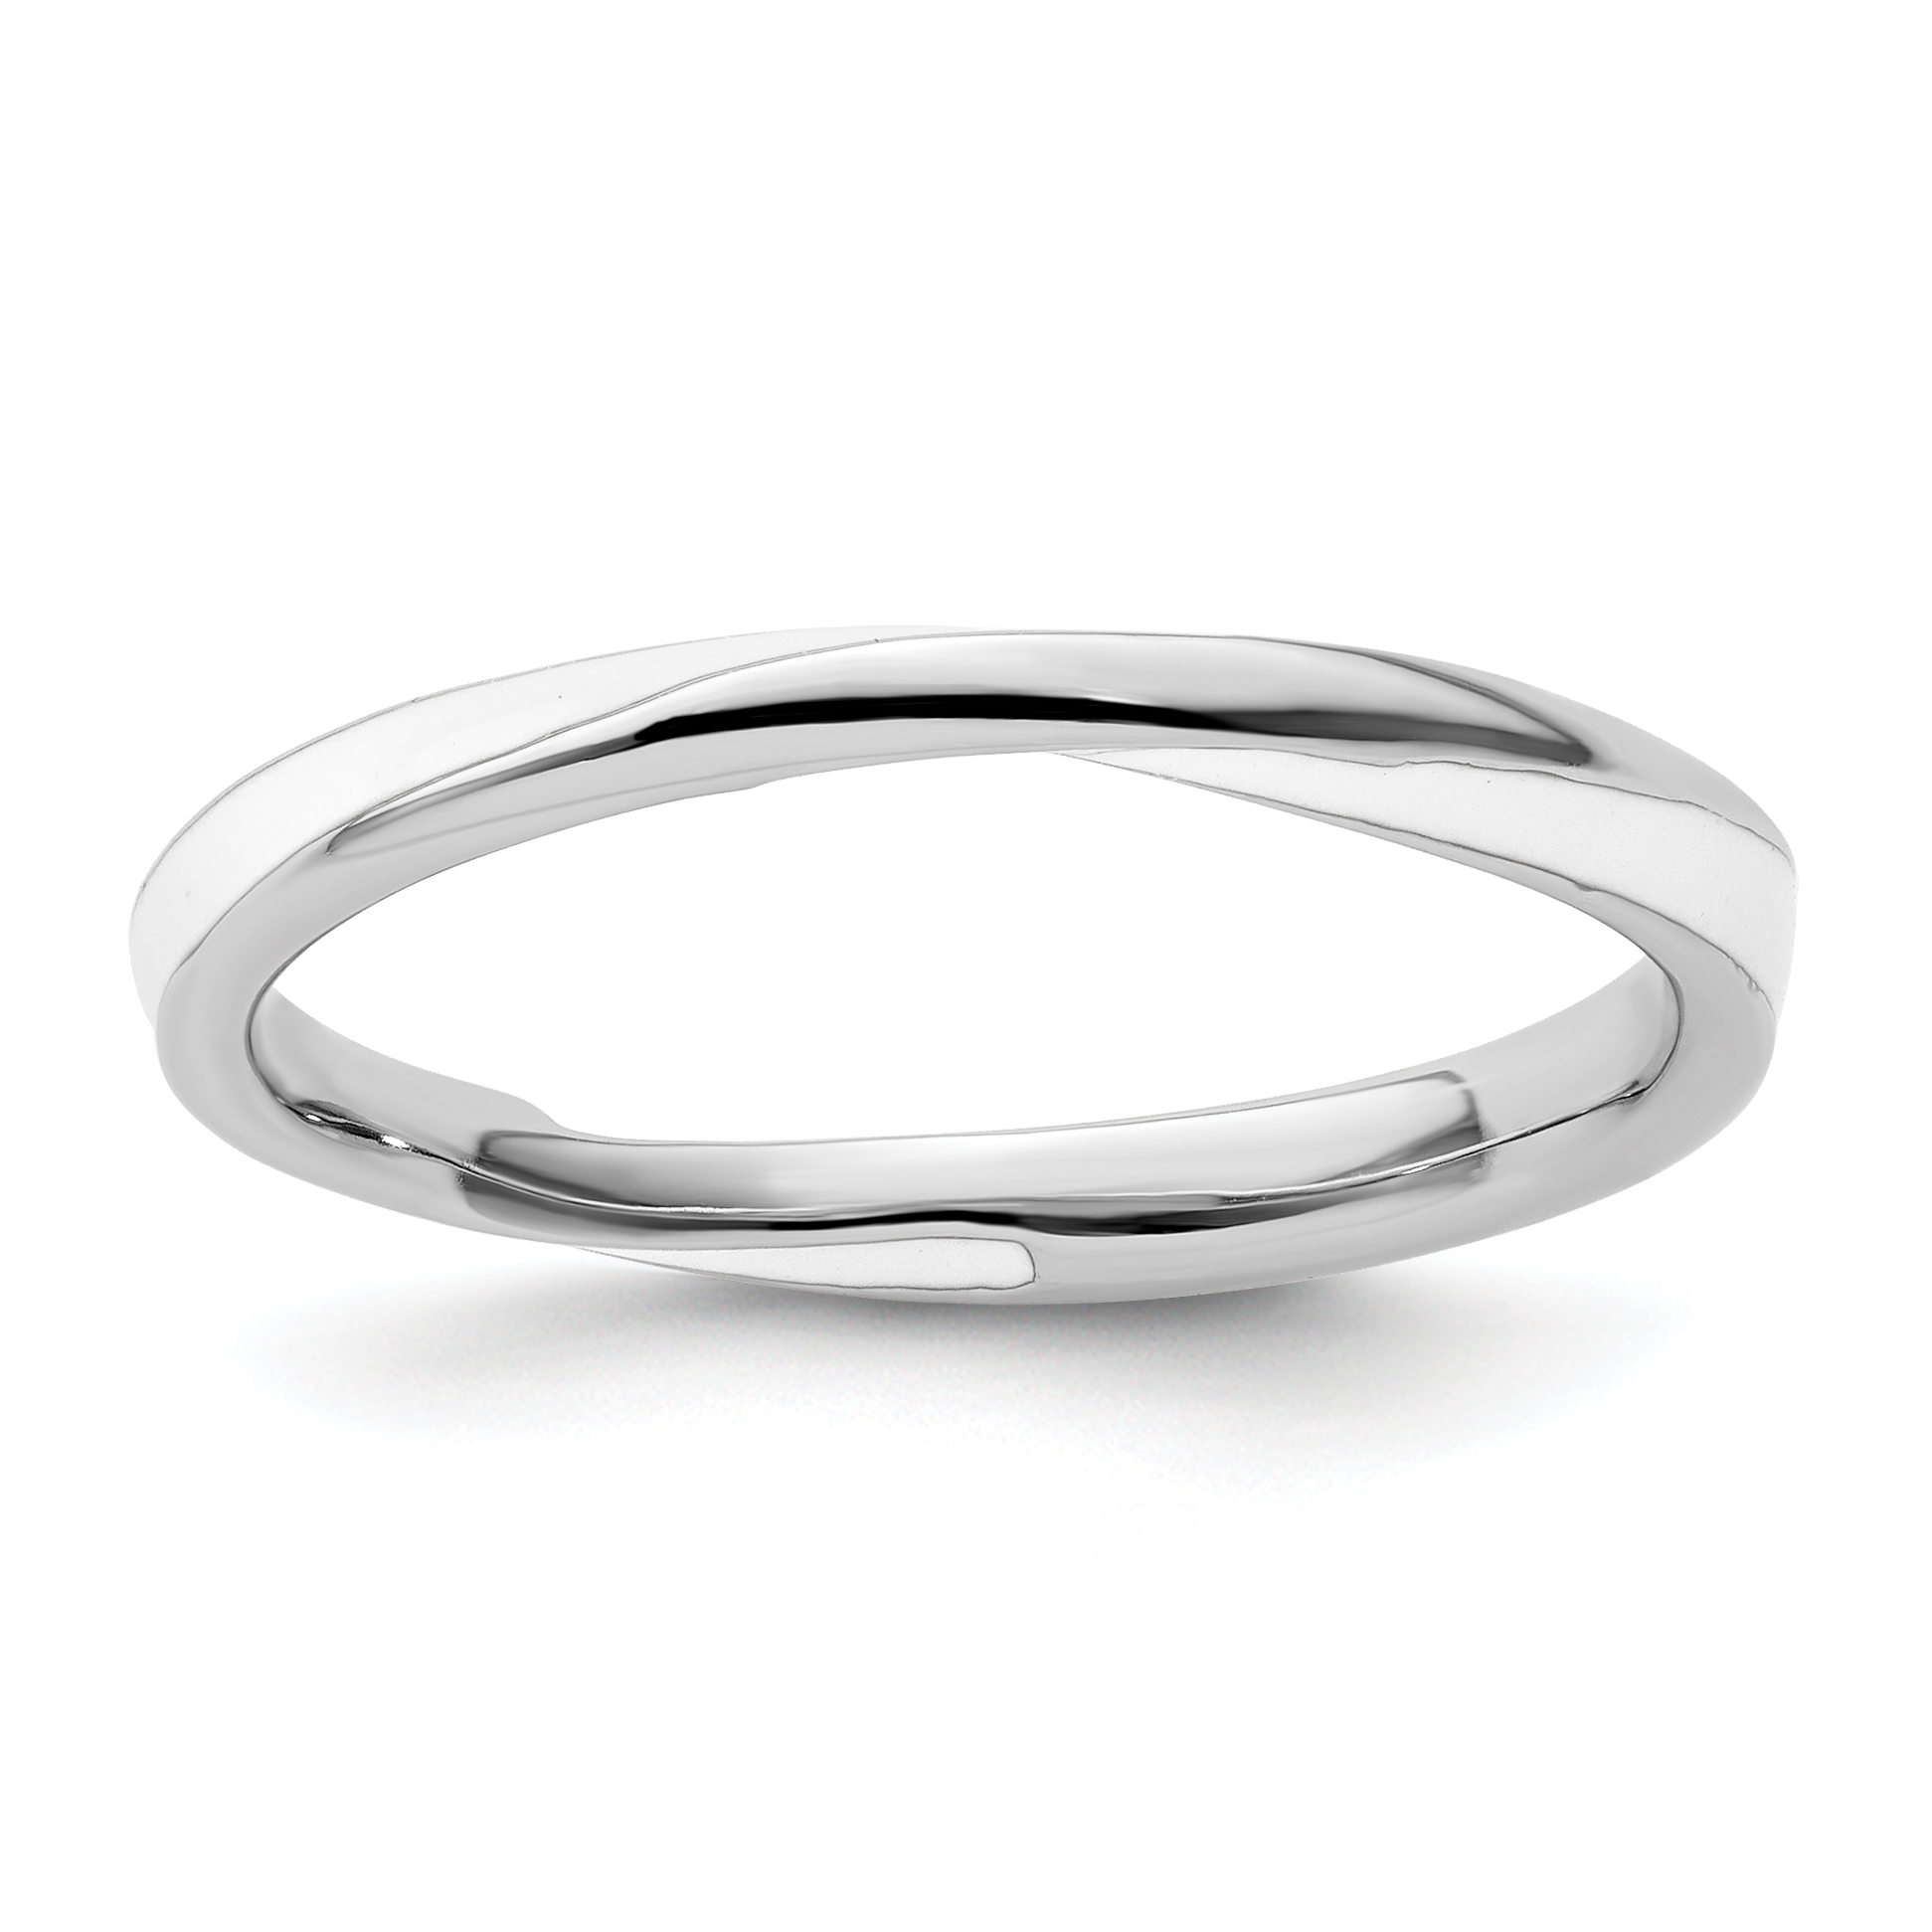 Stackable Expressions Sterling Silver Stackable Expressions Twisted White Enameled Ring